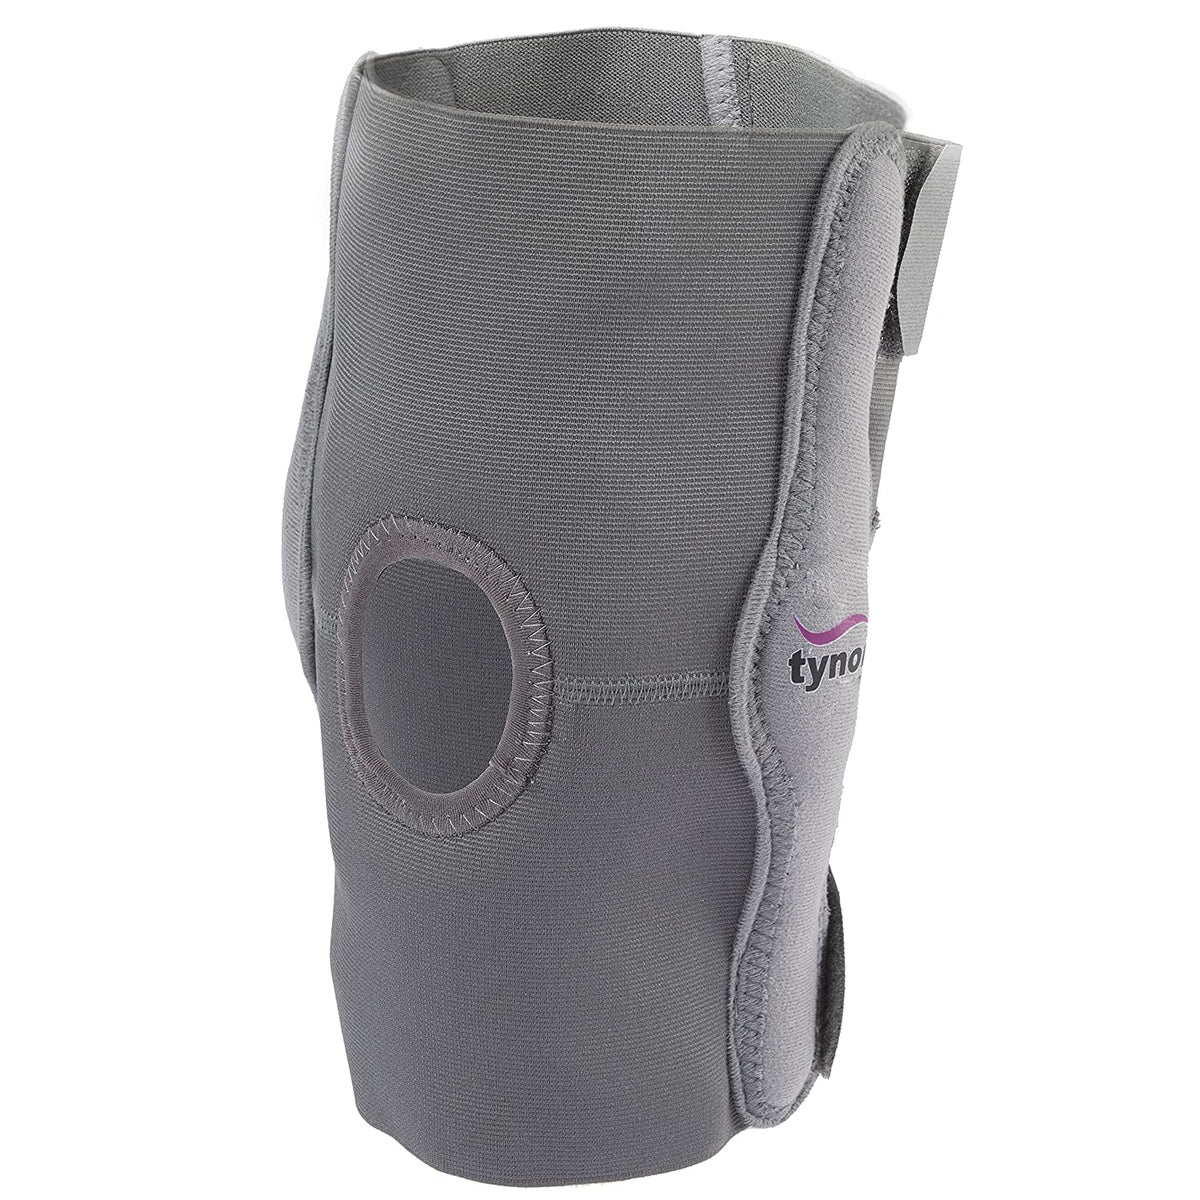 AHS Hinged Knee Brace for Men and Women, Knee Support for Swollen ACL, Tendon, Ligament, and Meniscus Injuries-2